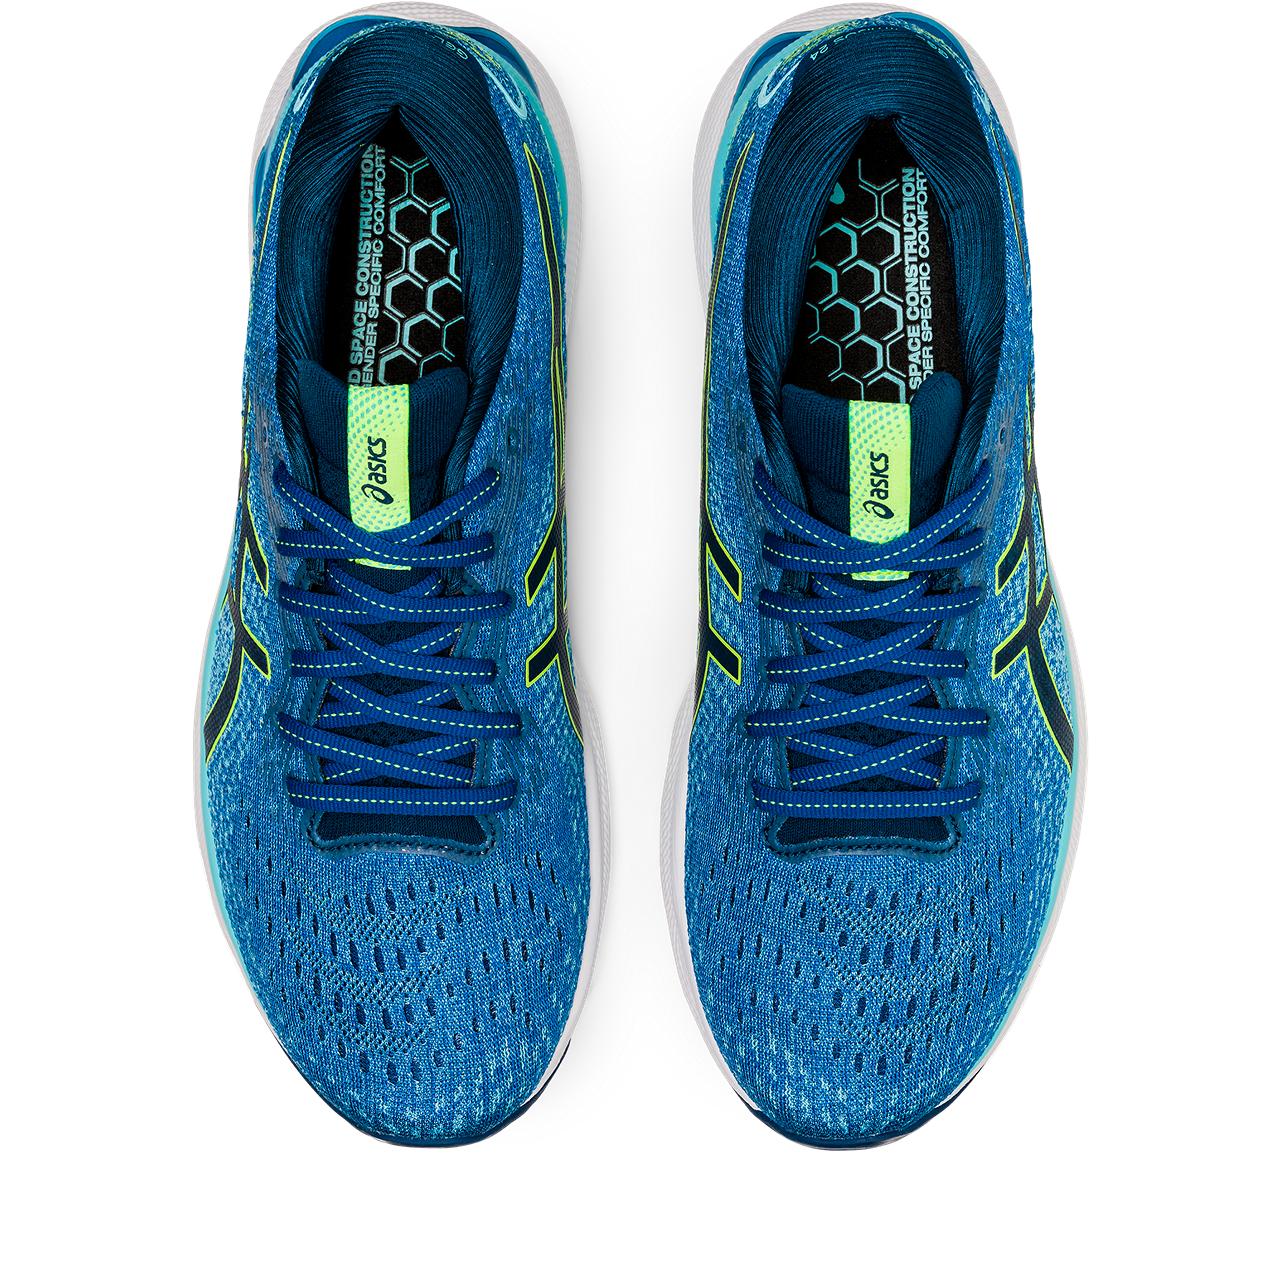 The Nimbus 24 running shoe works great for both everyday walking and long distance road running